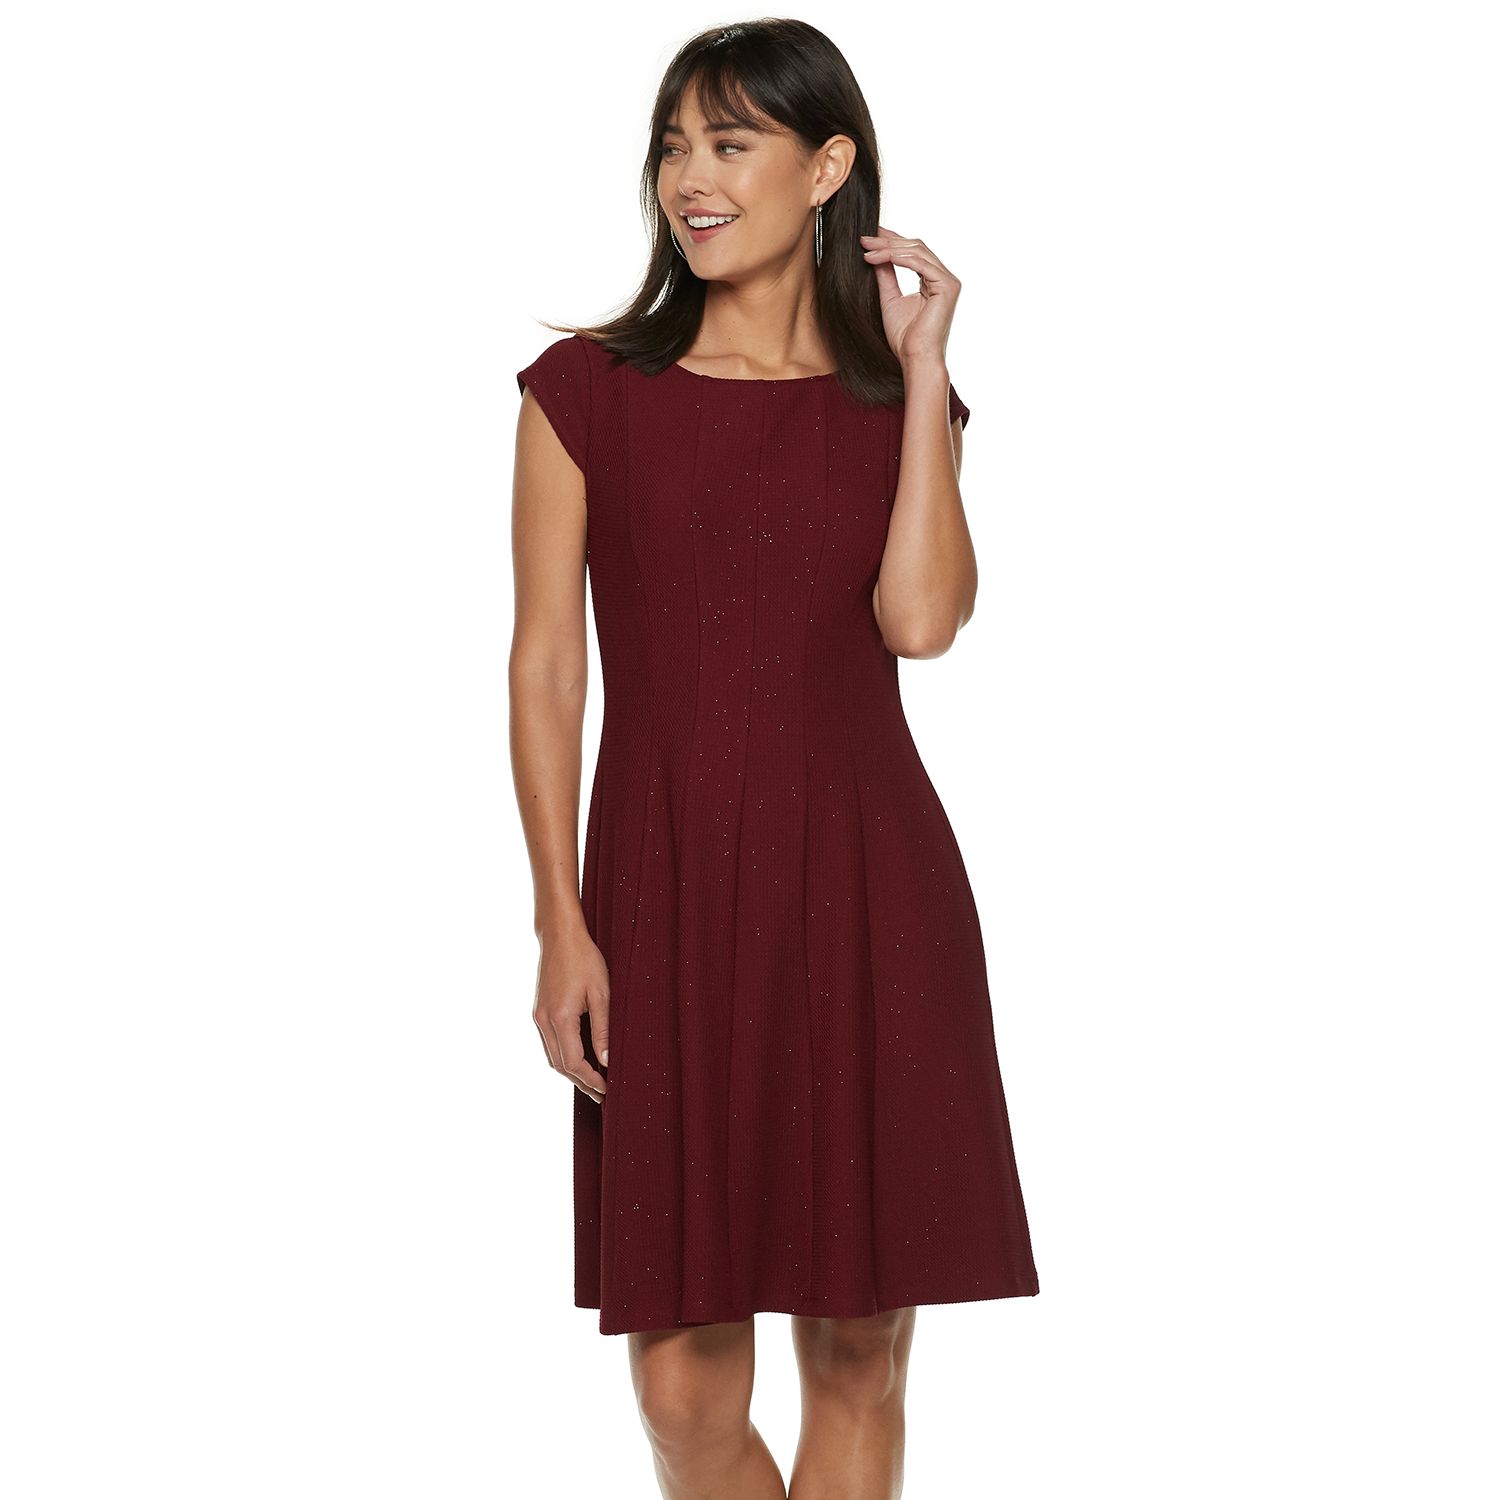 elle fit and flare dress